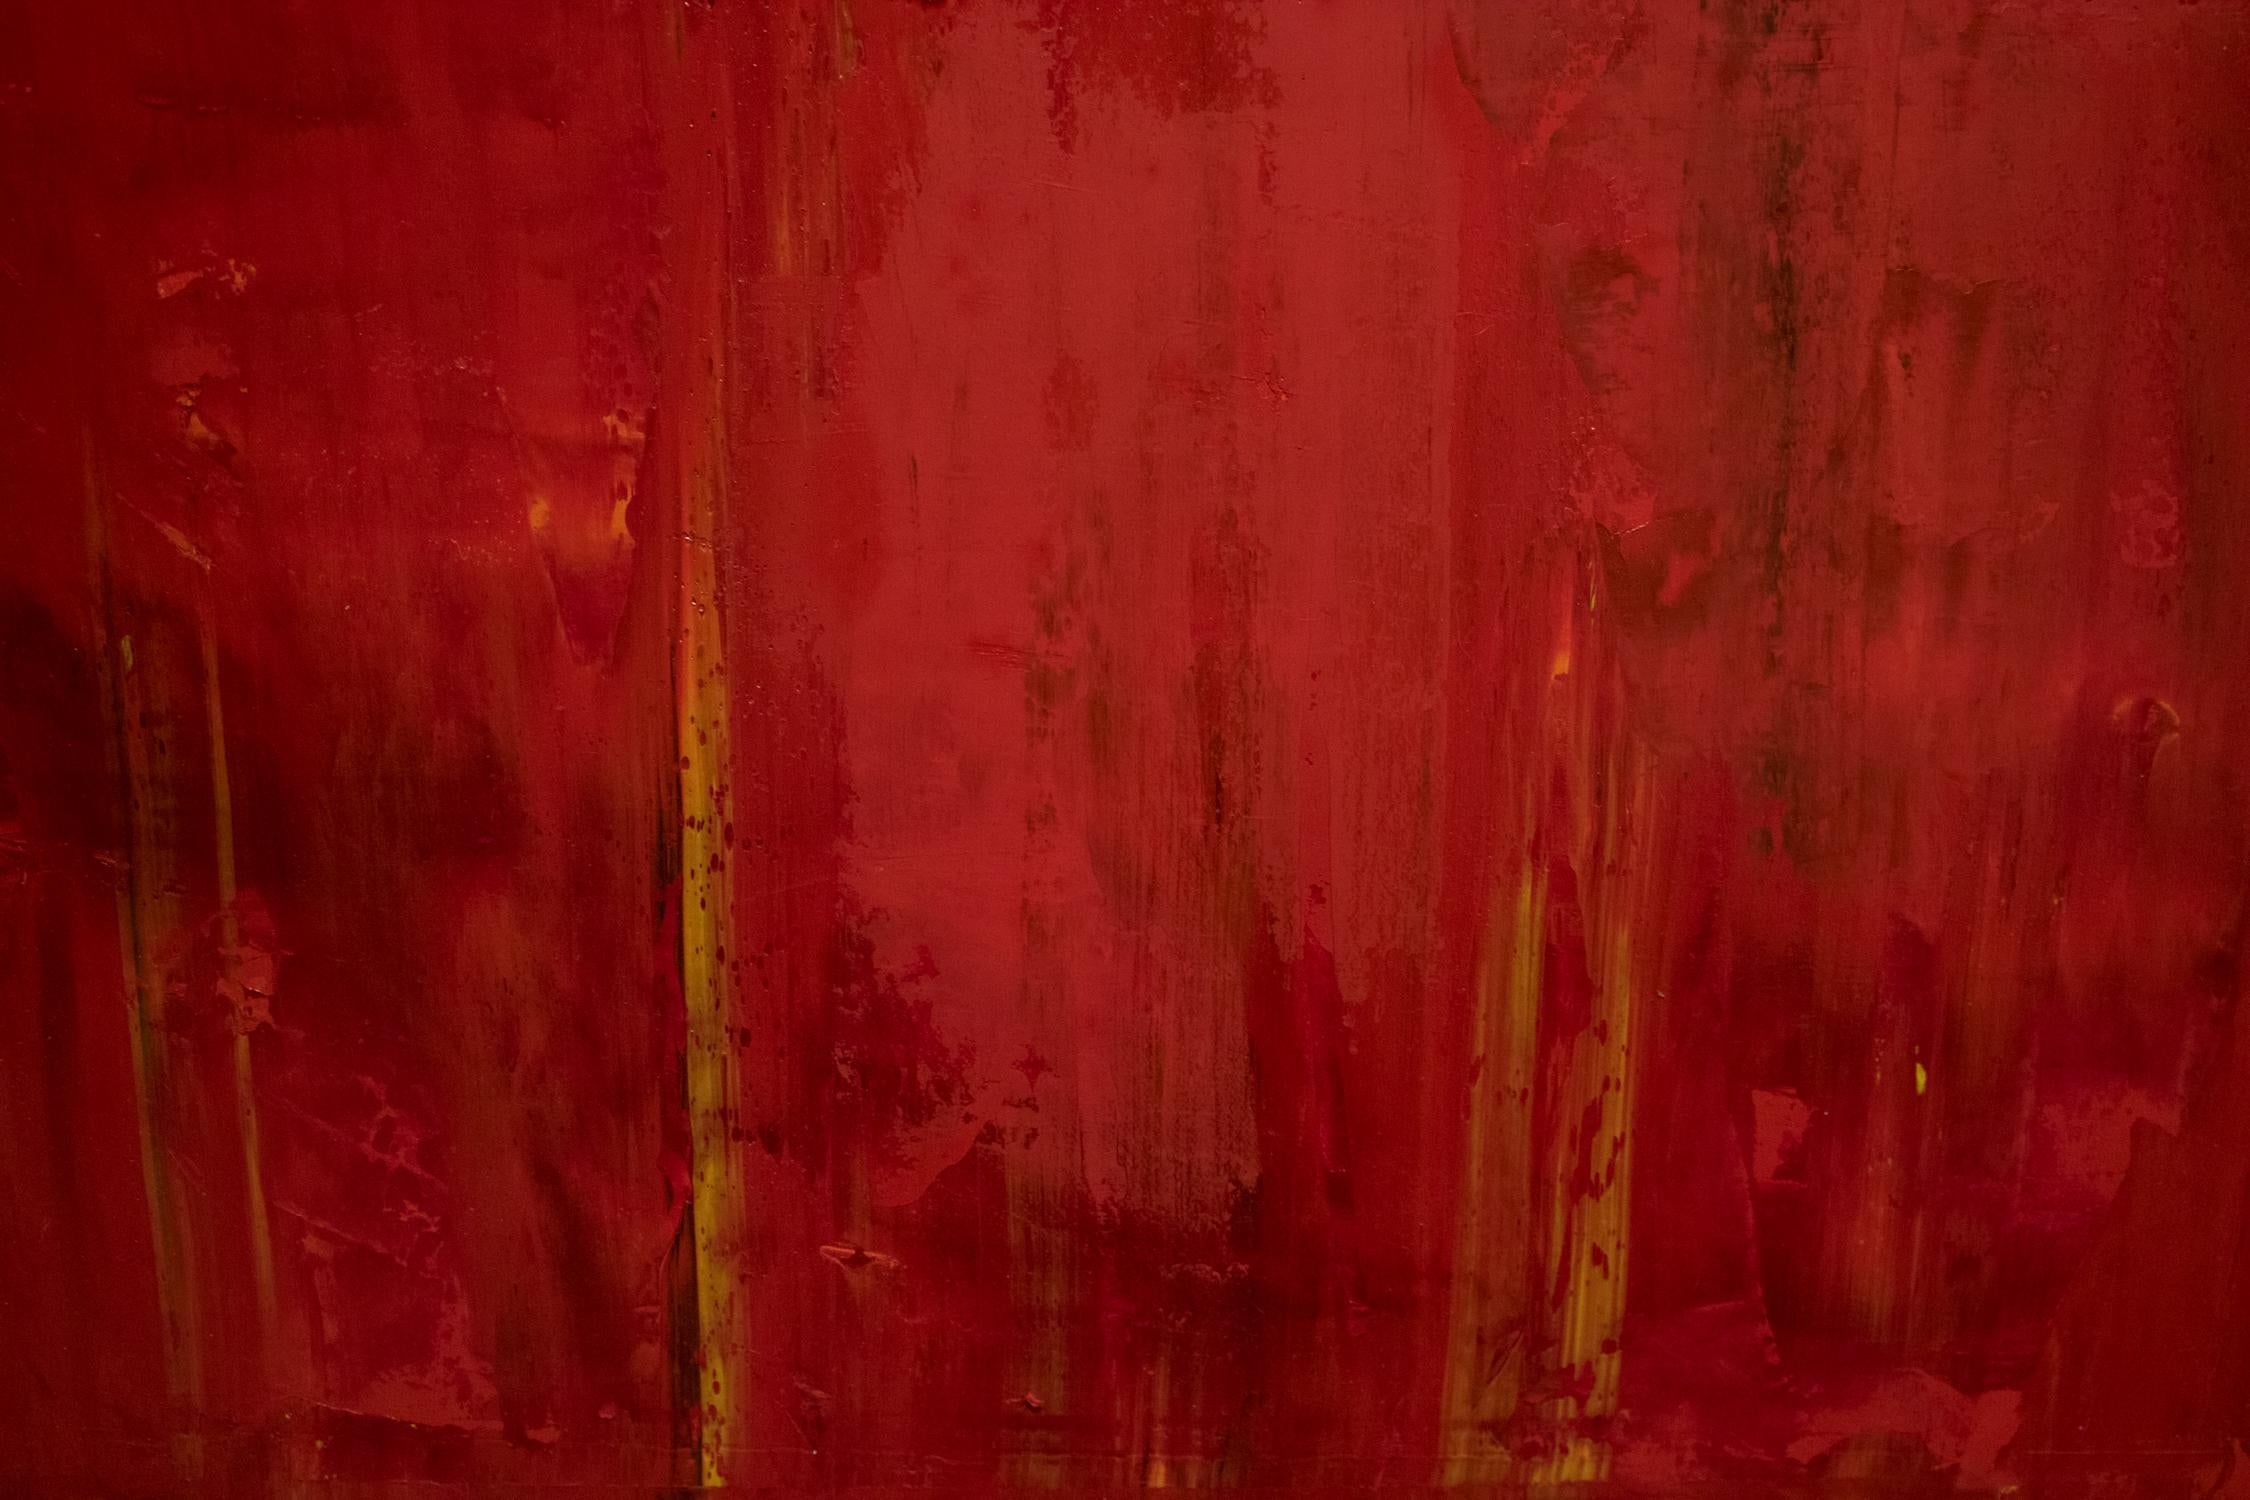 ROJO #1 is dominated by the richness of the red in the oil paint on the canvas. The perfectly geometric gold leaf circle, a recurring visual element in Yuri's works, contrasts nicely with the organic brush strokes and tones of the red on the